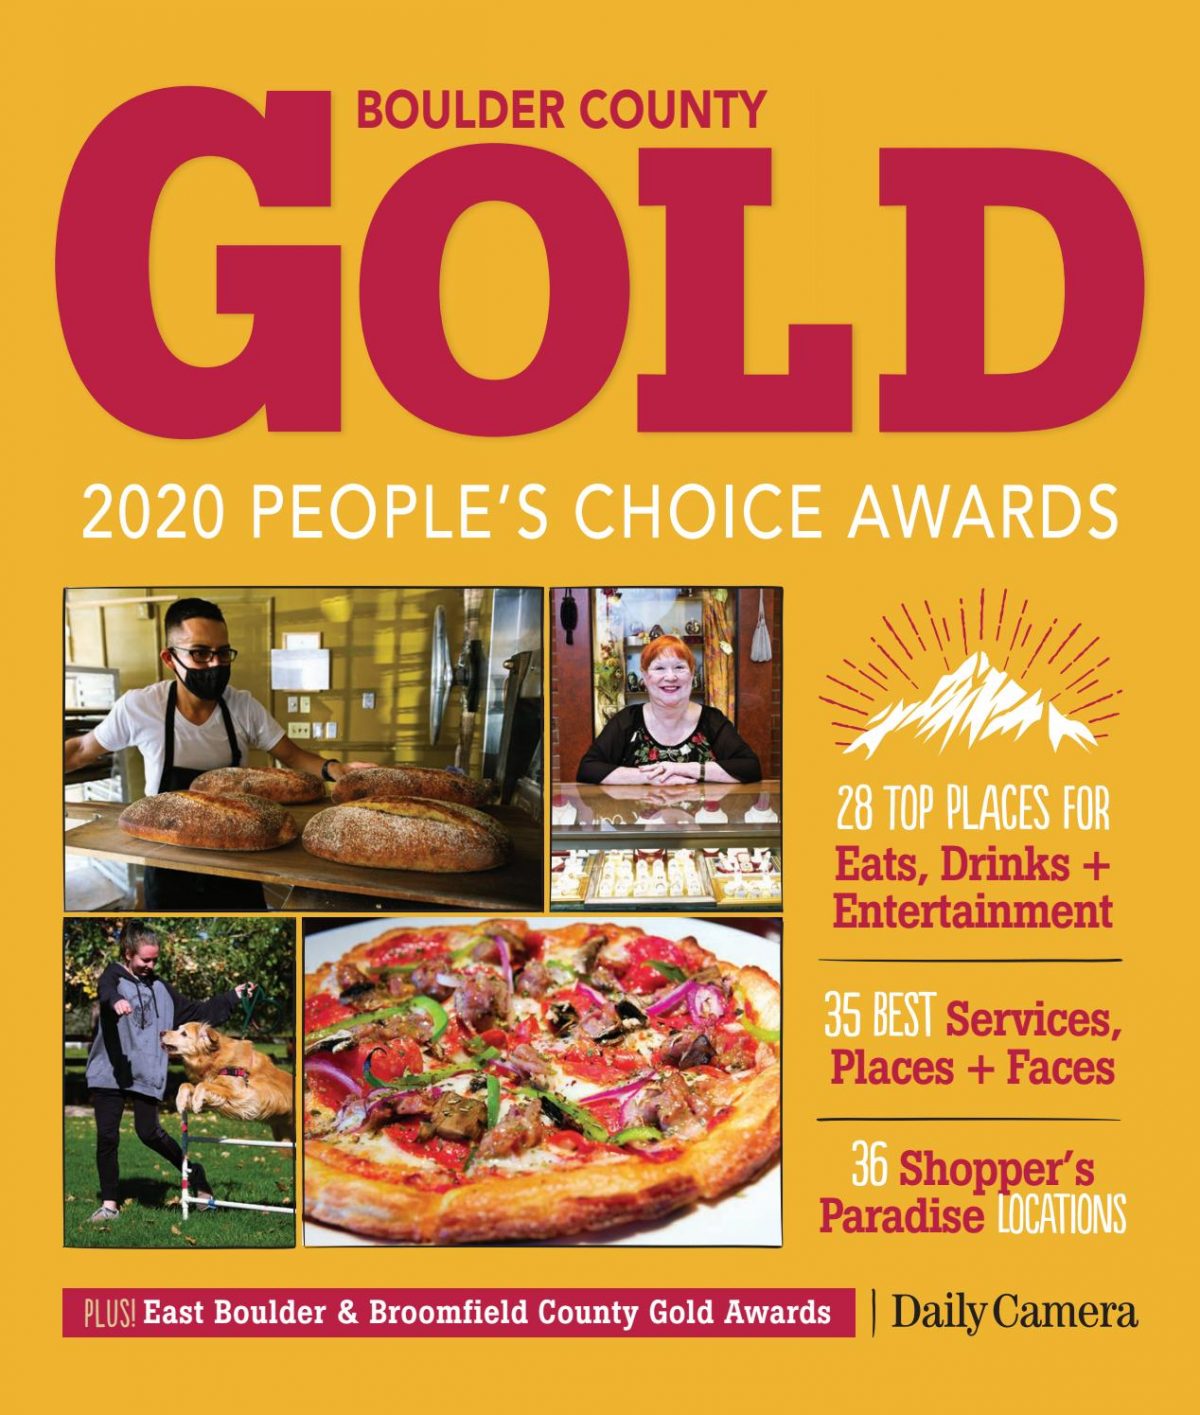 Daily Camera: Boulder County Gold 2020 Winners